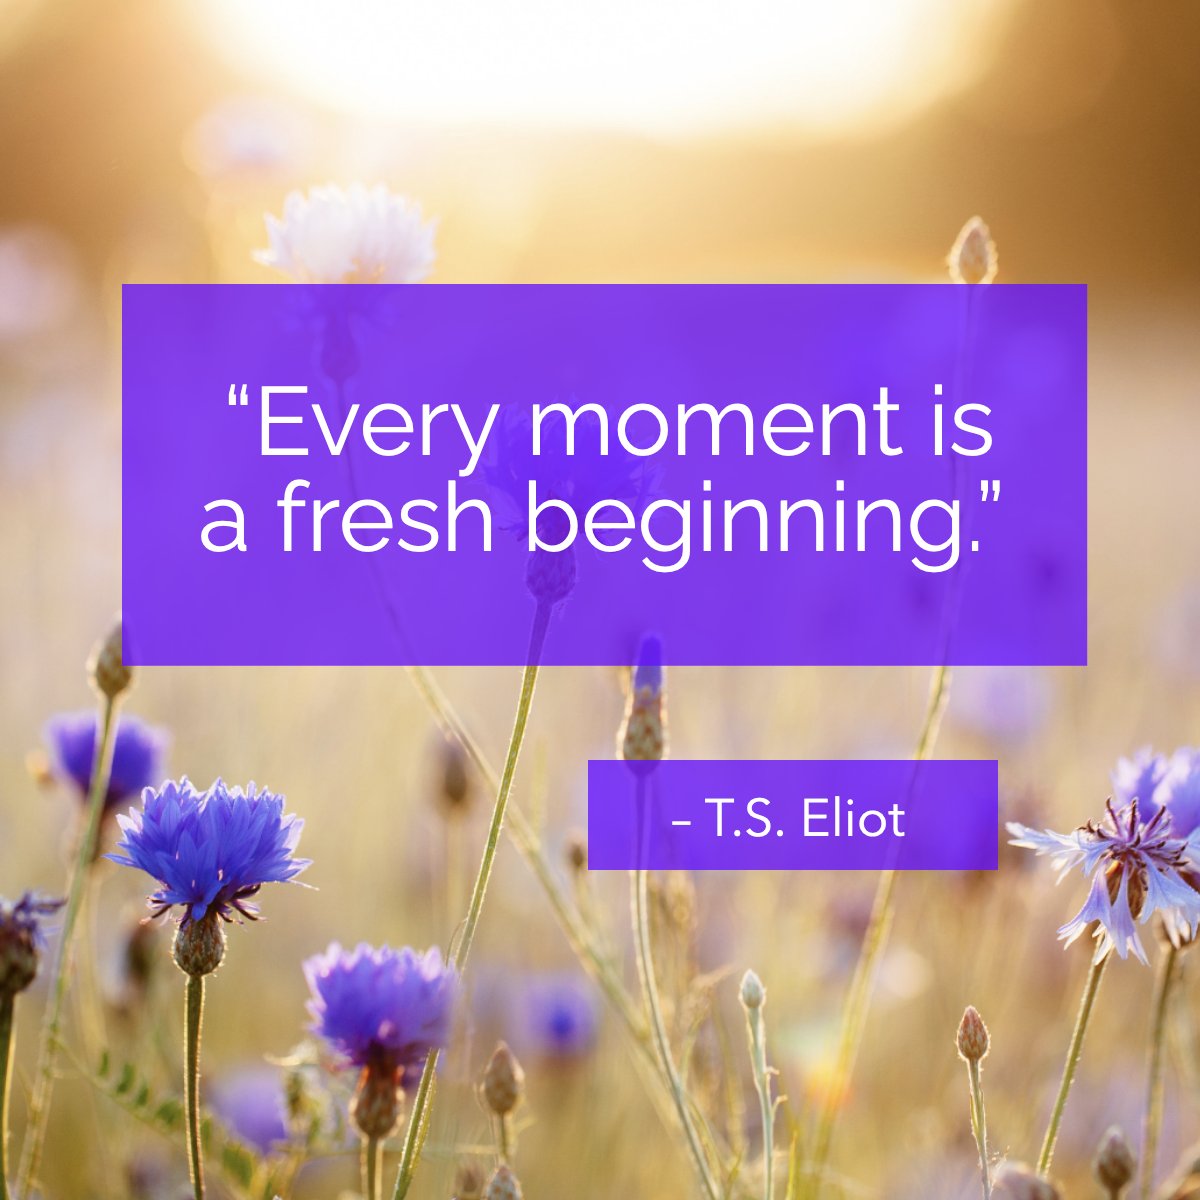 Thomas Stearns Eliot OM was a poet, essayist, publisher, playwright, literary critic, and editor.

Considered one of the 20th century's major poets 

#tseliot #beginnings #inspiring #inspirational #quote
 #RacingRealEstateAgent #BarrettRealEstate